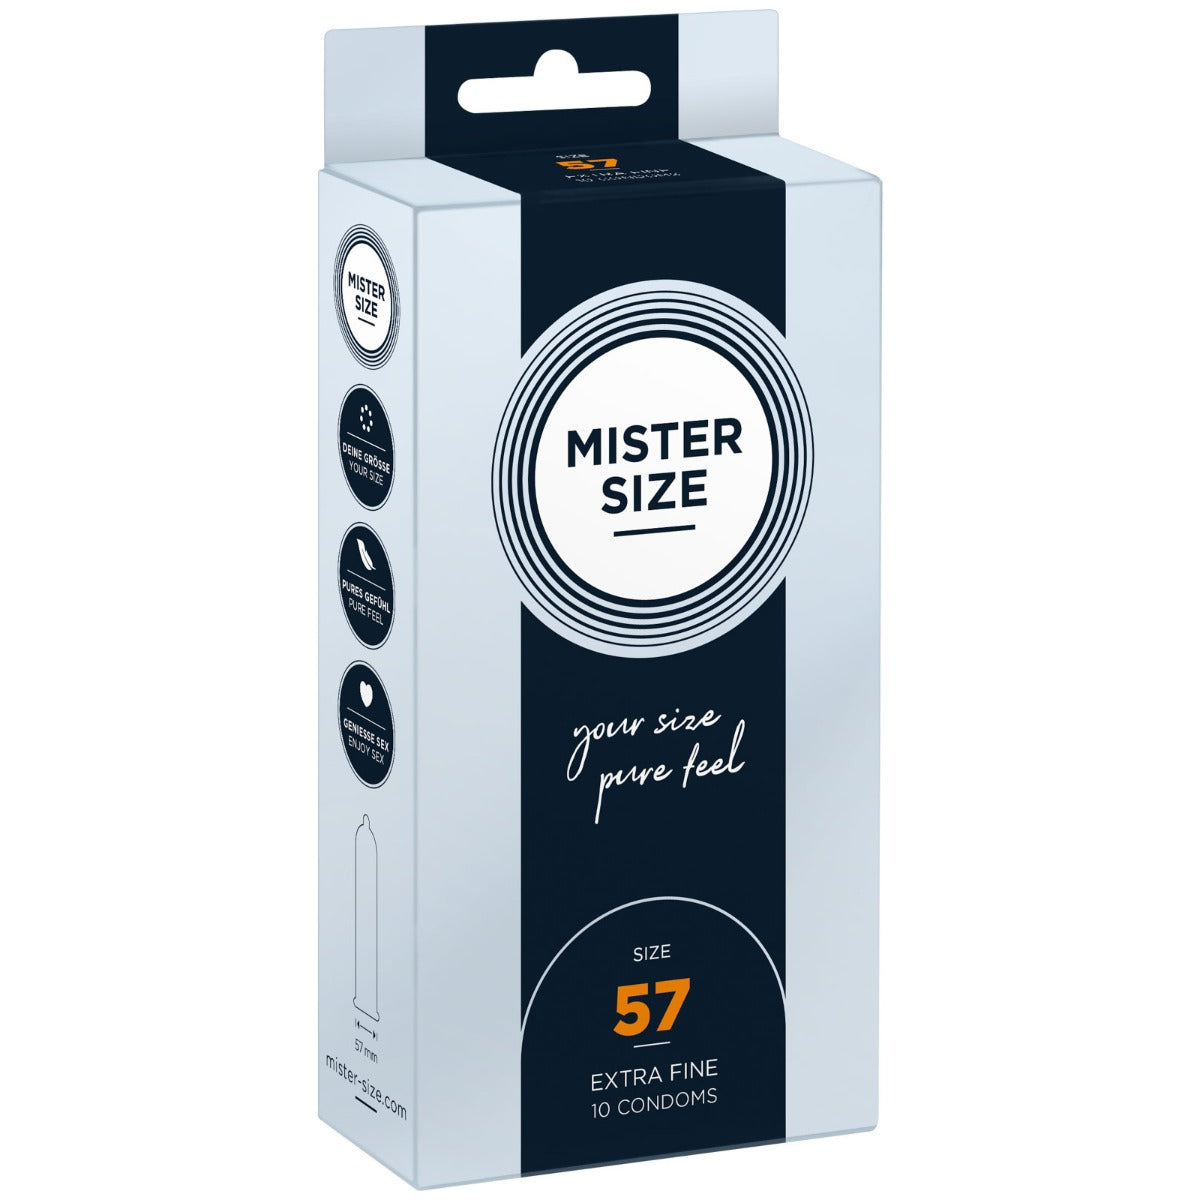 Condoms MISTER SIZE - pure feel Condoms - Size 57 mm (10 pack)   